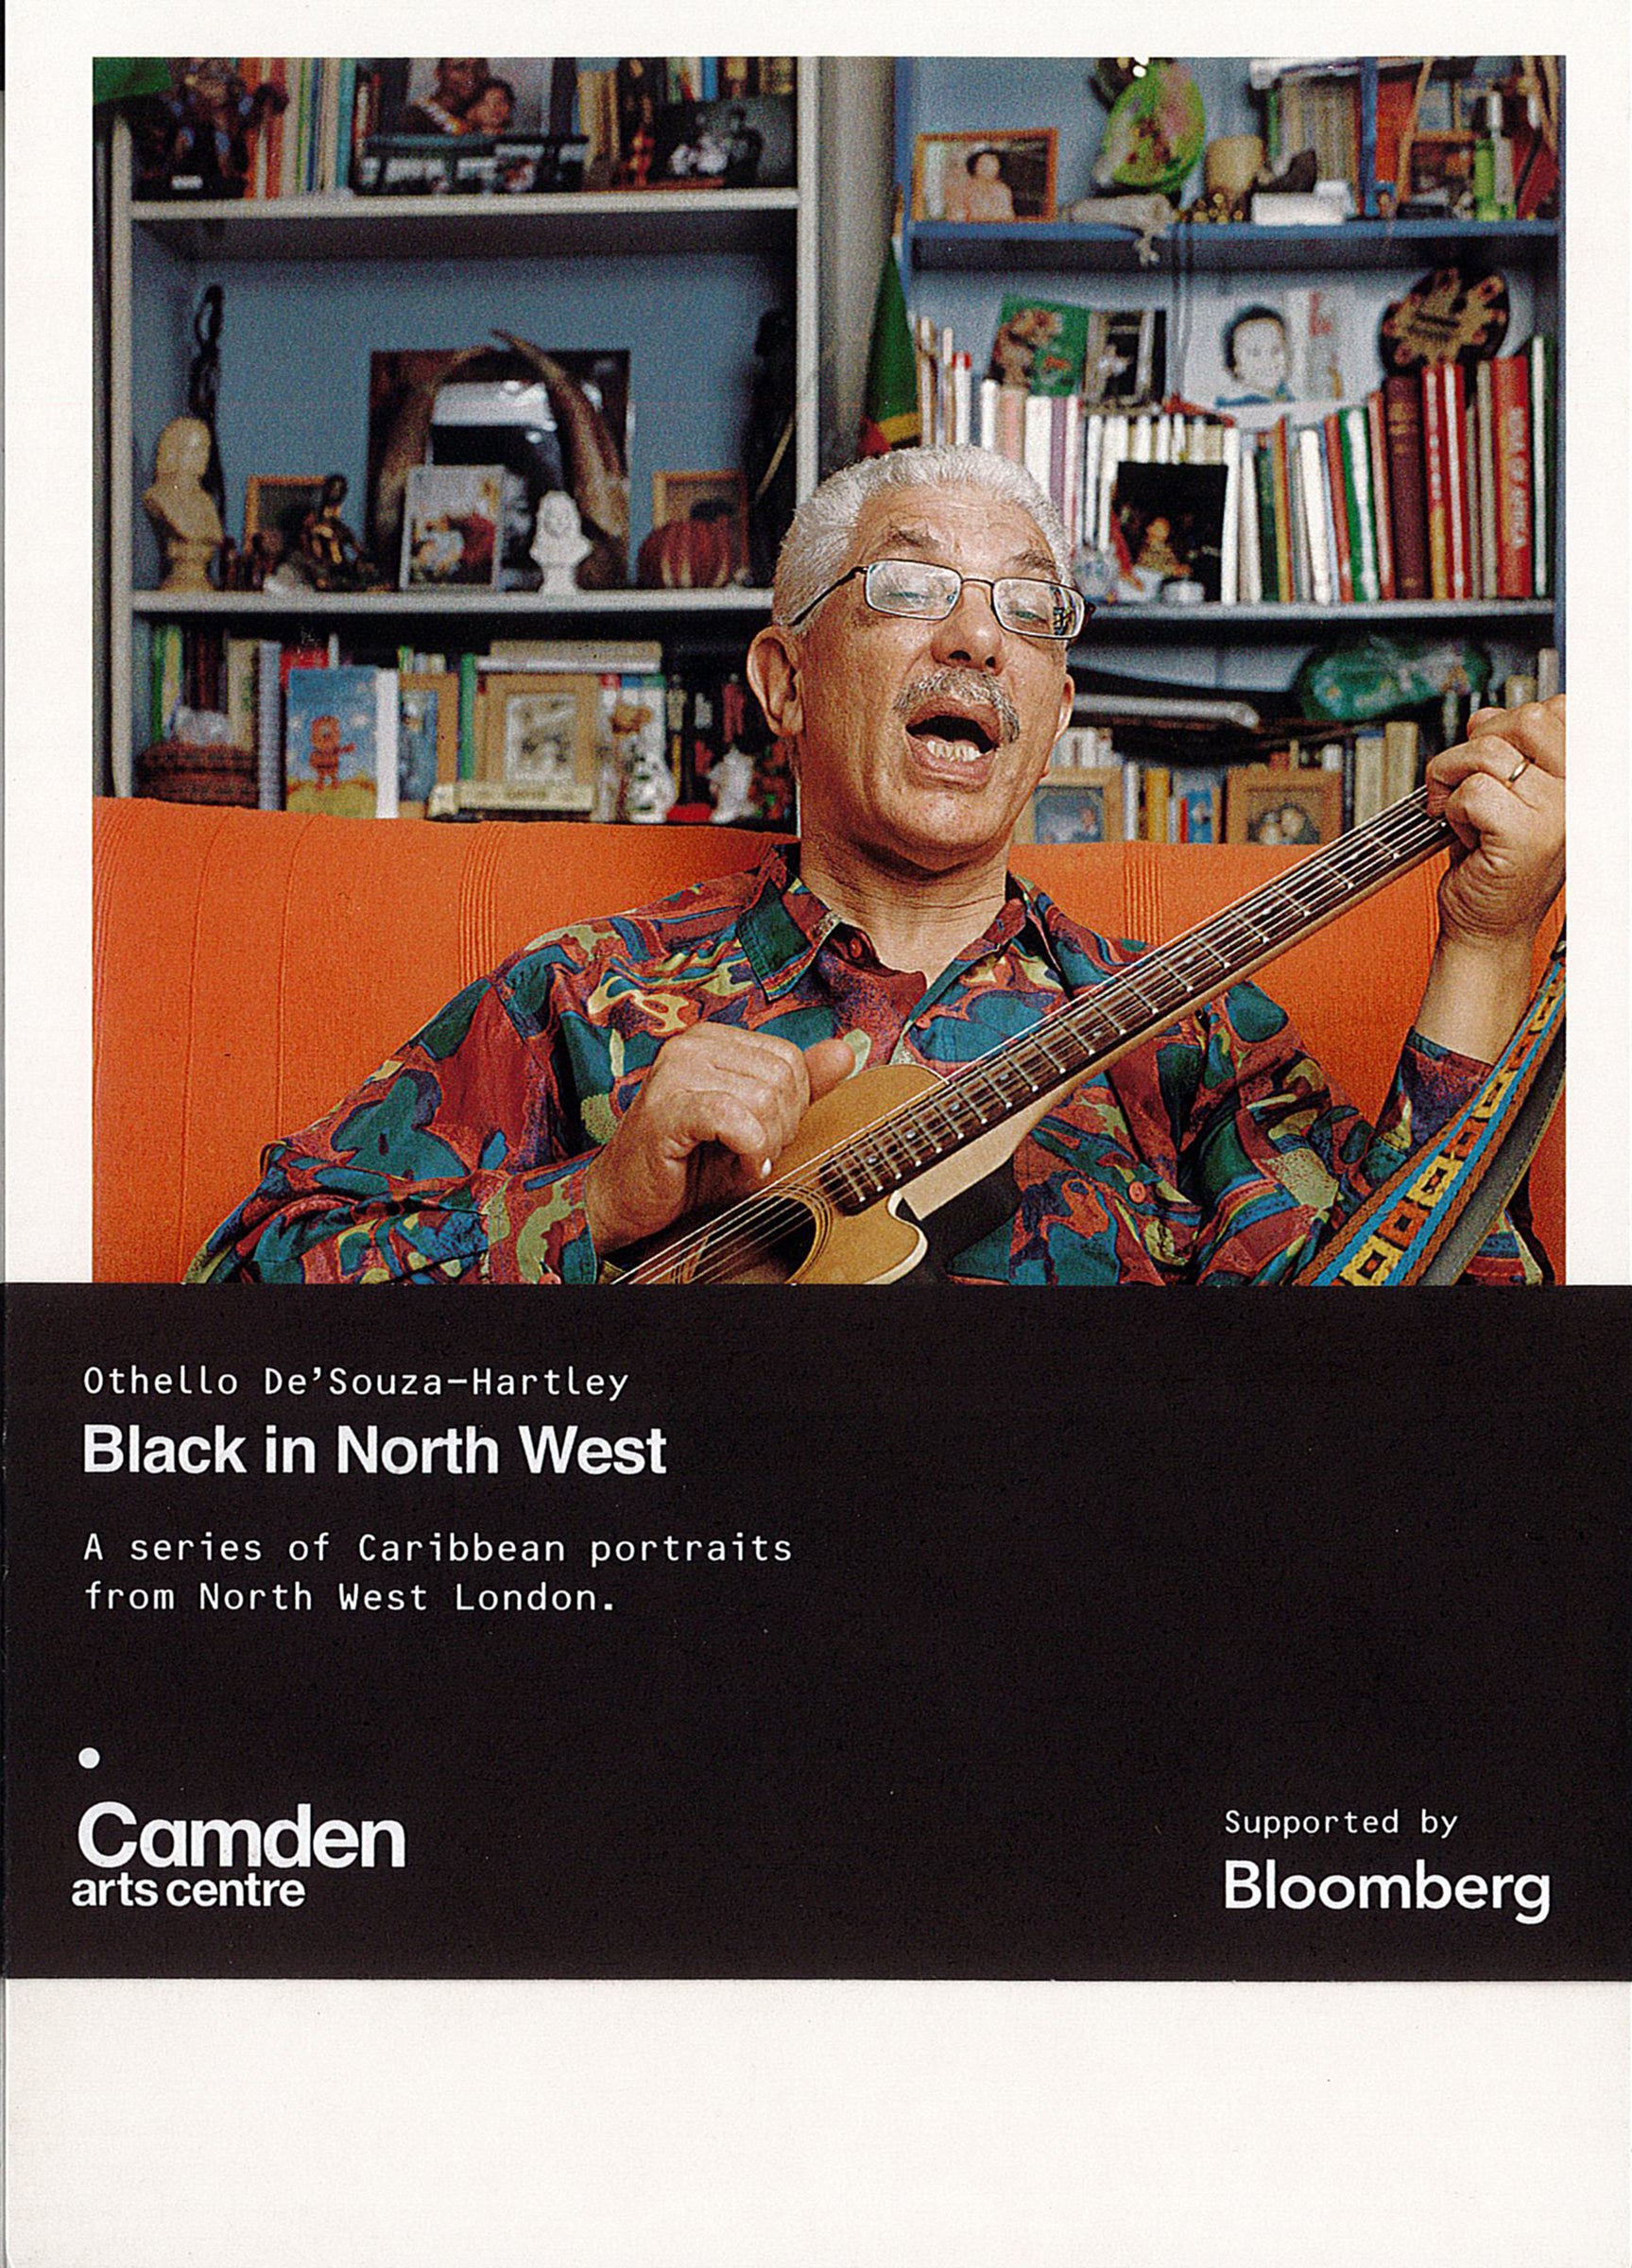 Black in North West: A series of Caribbean portraits from North West London, Othello De'Souza-Hartley